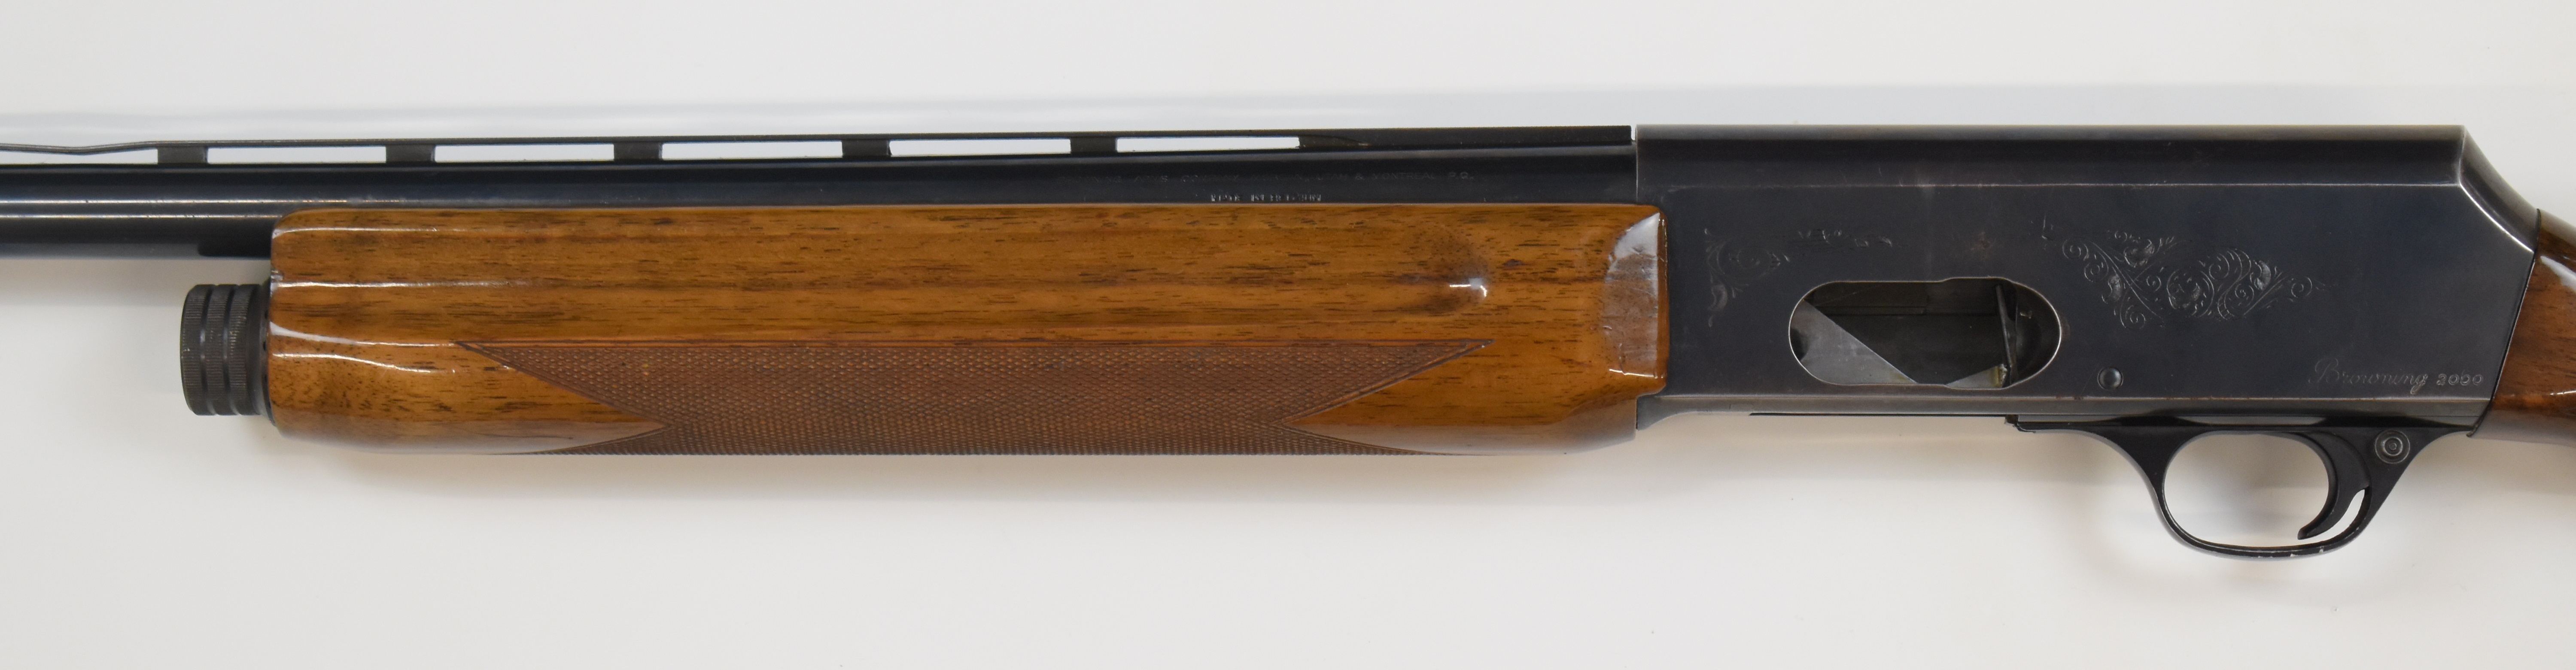 Browning 2000 12 bore 3-shot semi-automatic shotgun with named and engraved lock, chequered semi- - Image 10 of 11